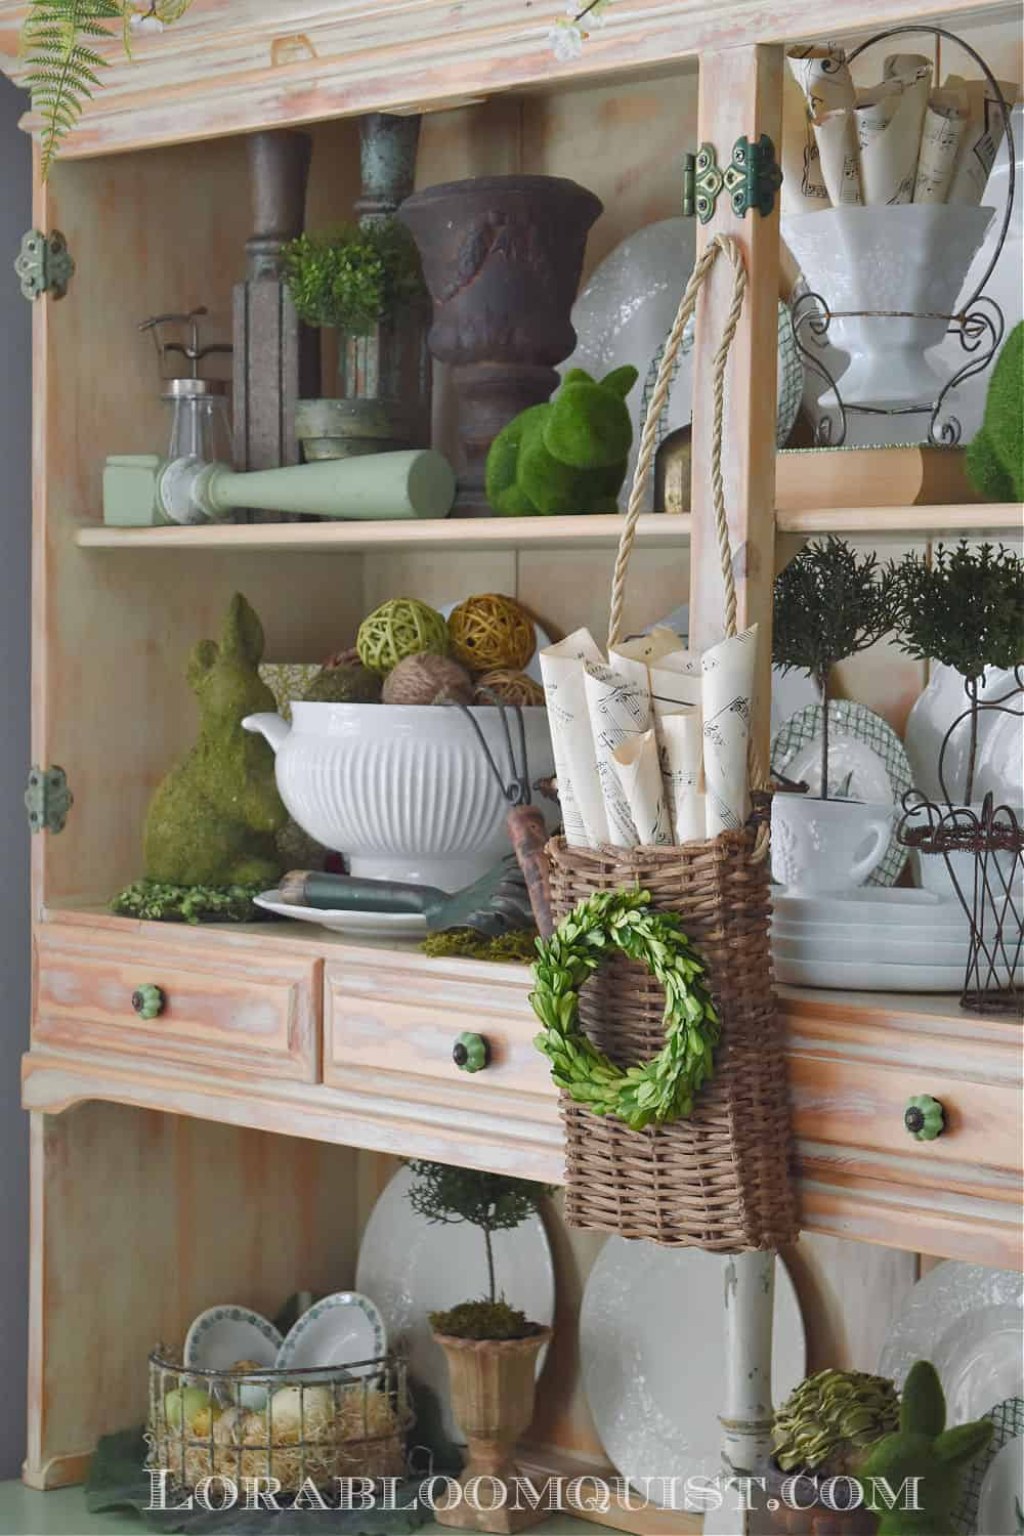 Picture of: Hutch Decorating Ideas for Spring (with Vintage Garden Style